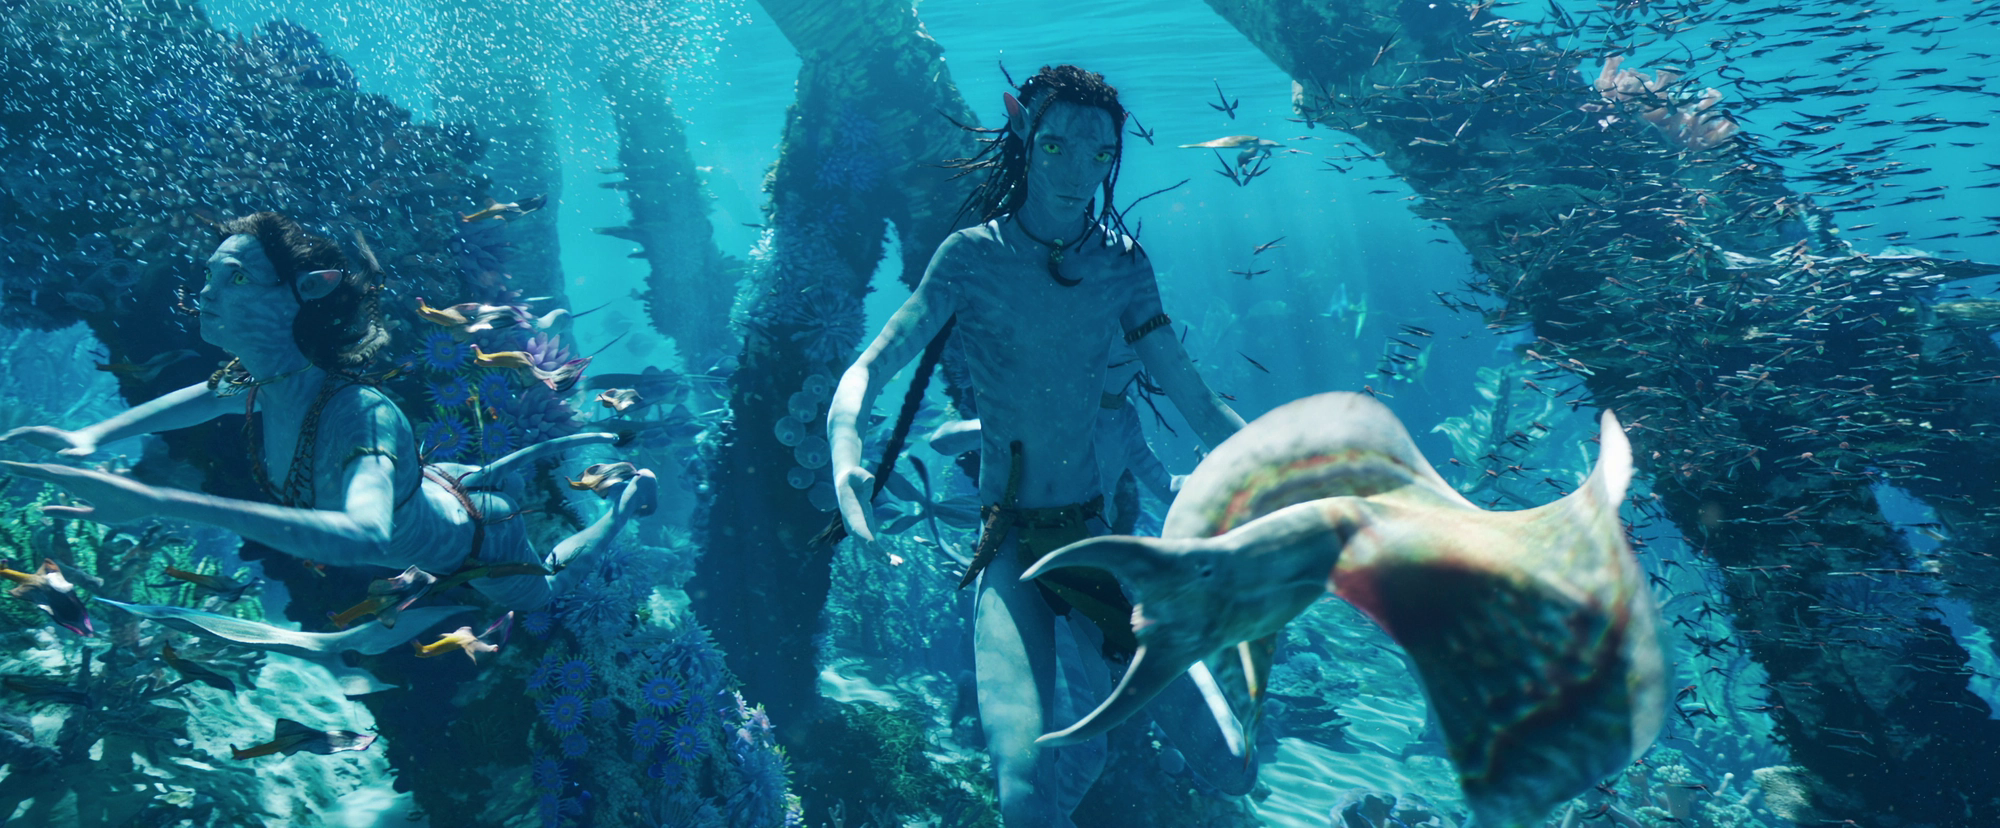 Avatar: The Way Of Water is truly a wonder of the world, not just a movie - Photo 10.